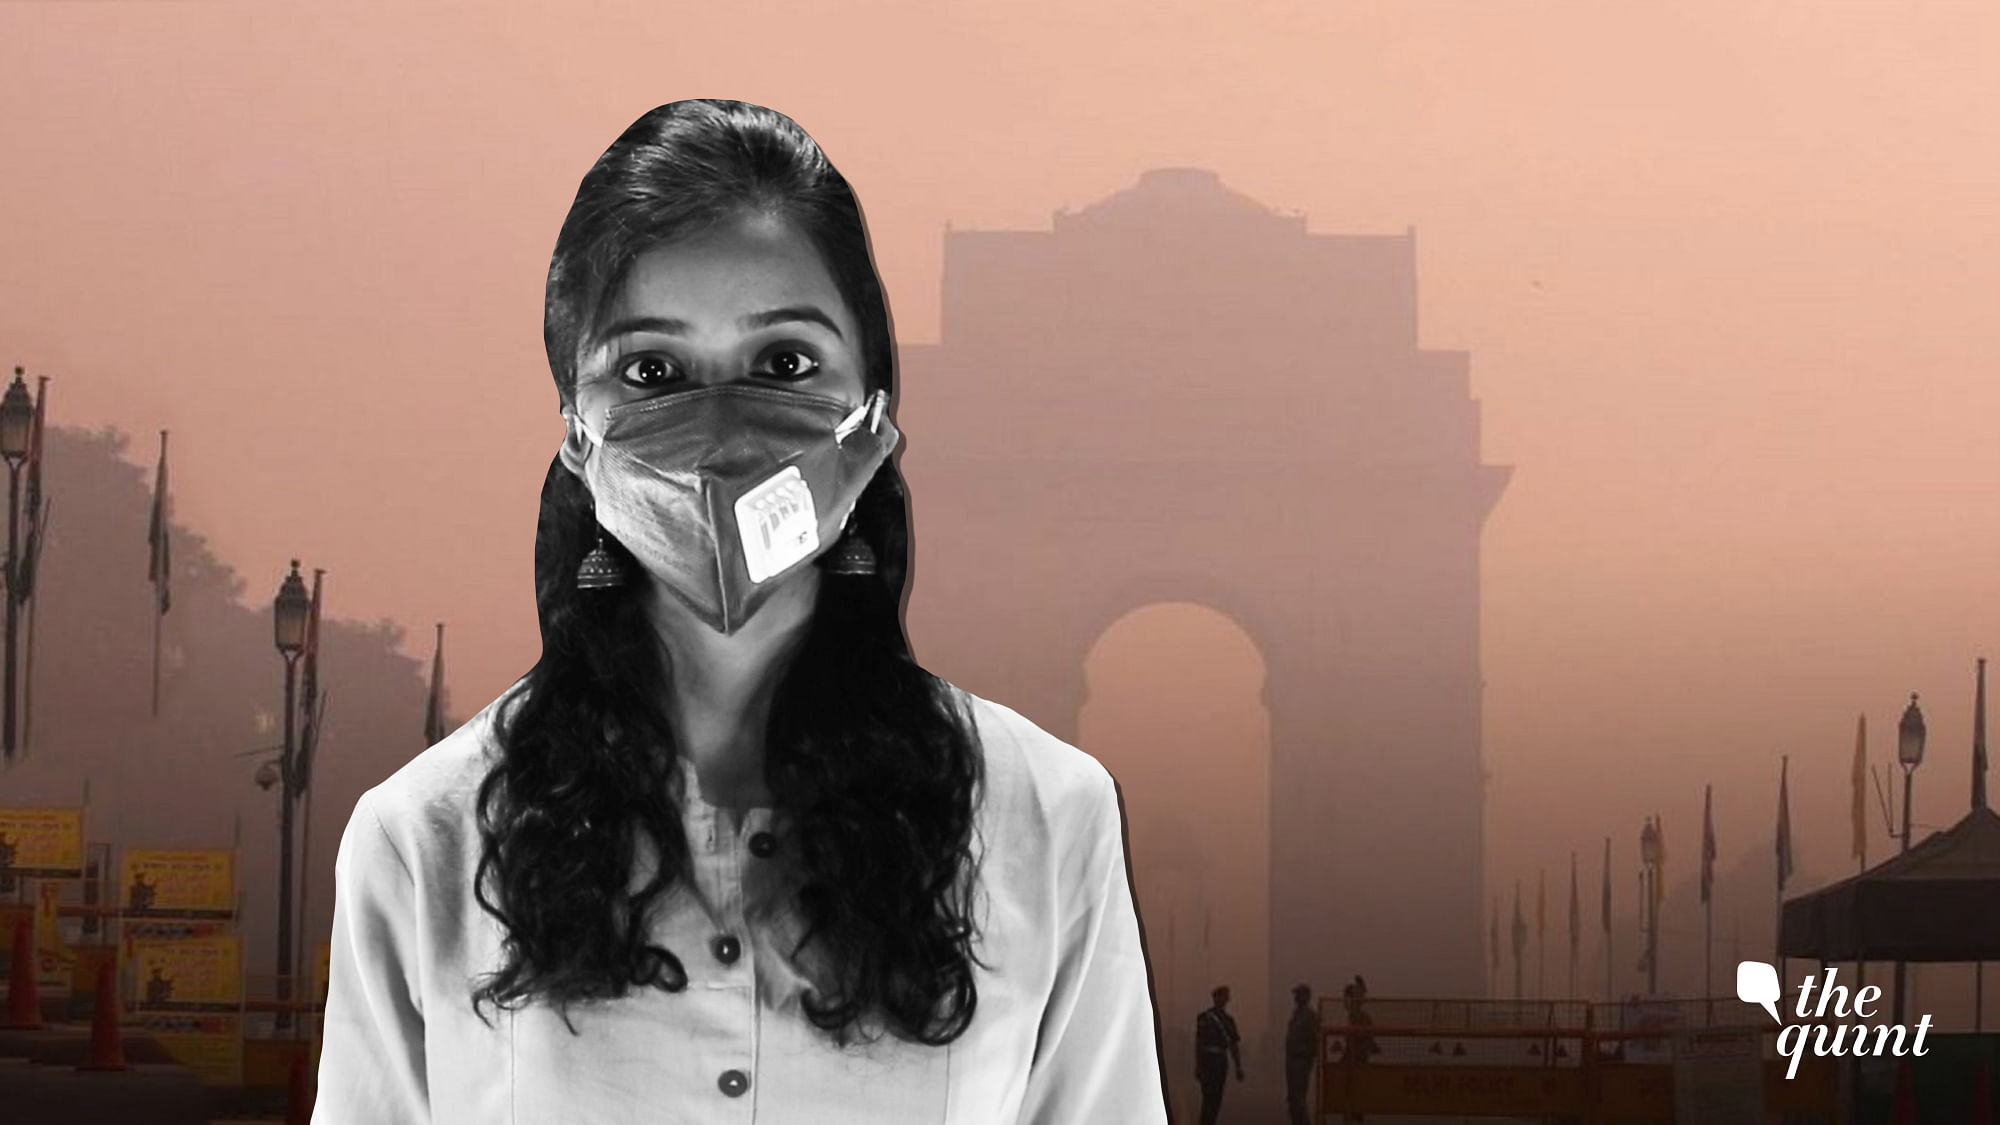 Did you know that breathing the polluted Delhi air, on dense days, is equal to smoking 50 cigarettes a day?